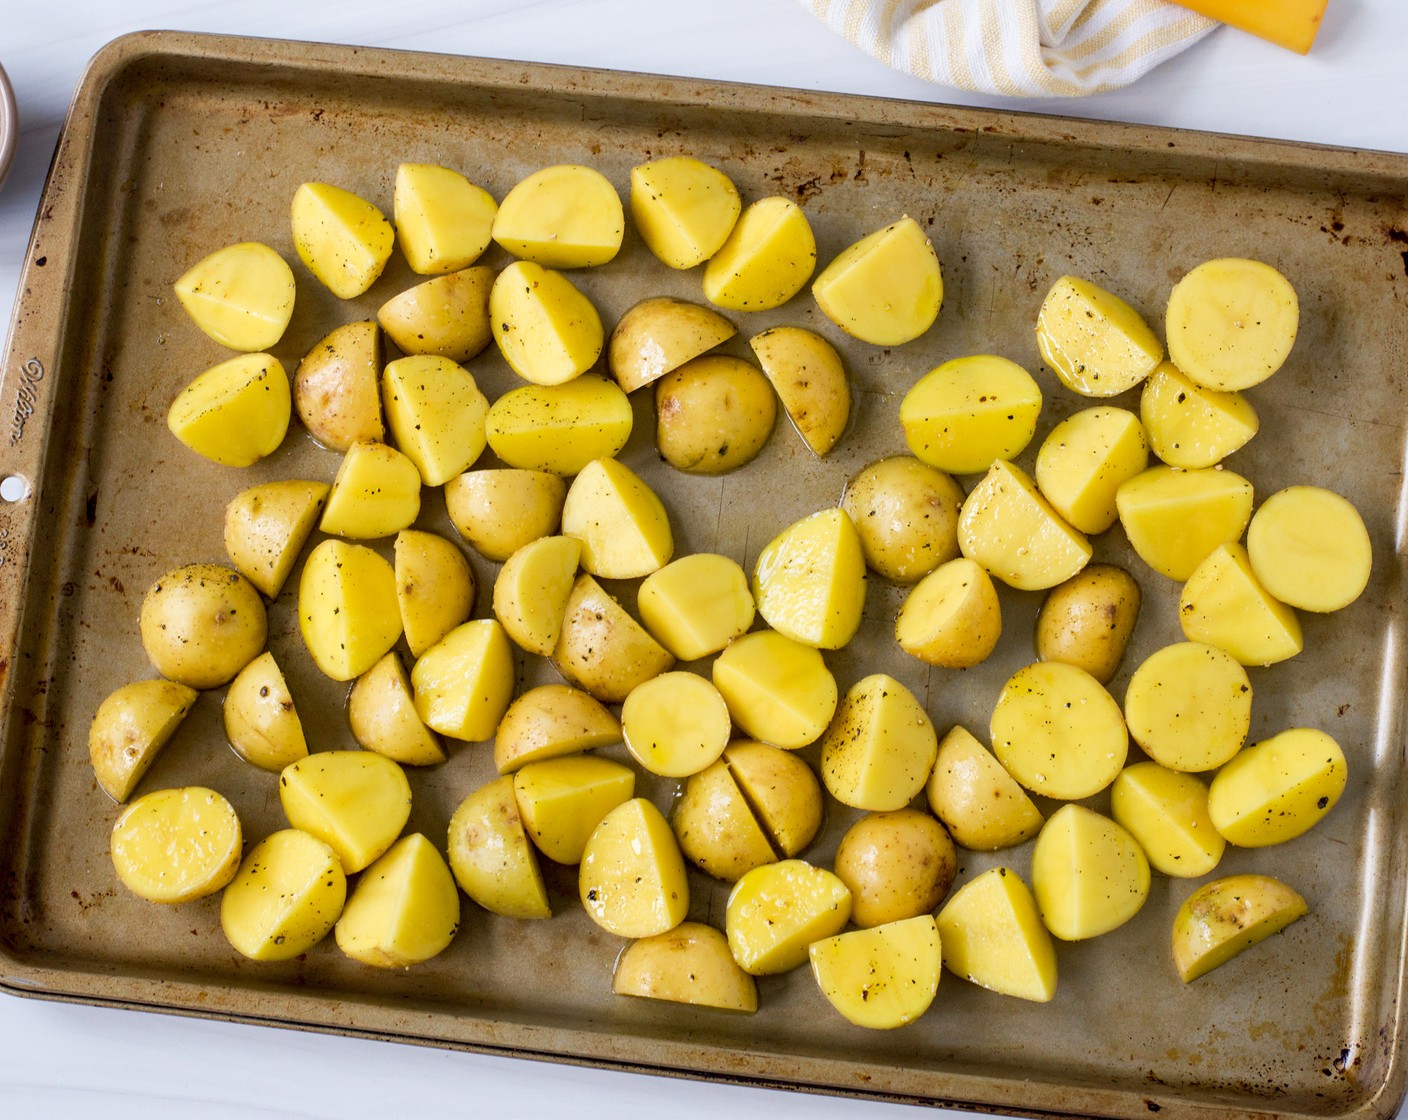 step 2 Halve or quarter the Baby Potatoes (1.5 lb) depending on their size and toss them in a large bowl with 2 Tbsp of Extra-Virgin Olive Oil (2 Tbsp), 1 tsp of the Kosher Salt (1 tsp), and ½ tsp of Freshly Ground Black Pepper (1/2 tsp). Arrange the potatoes in an even layer on a rimmed half-sheet pan.